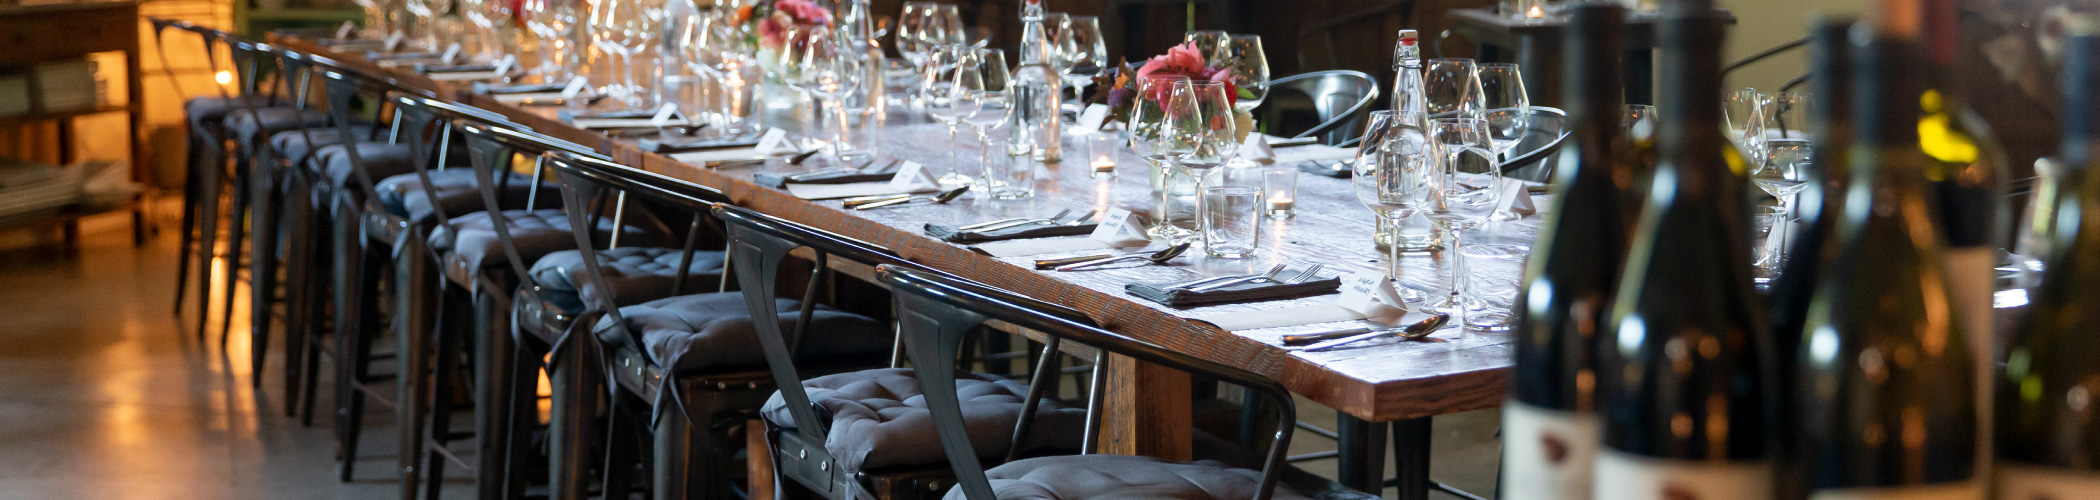 A barnwood table at The Kitchen at Middleground Farms set for a private event.